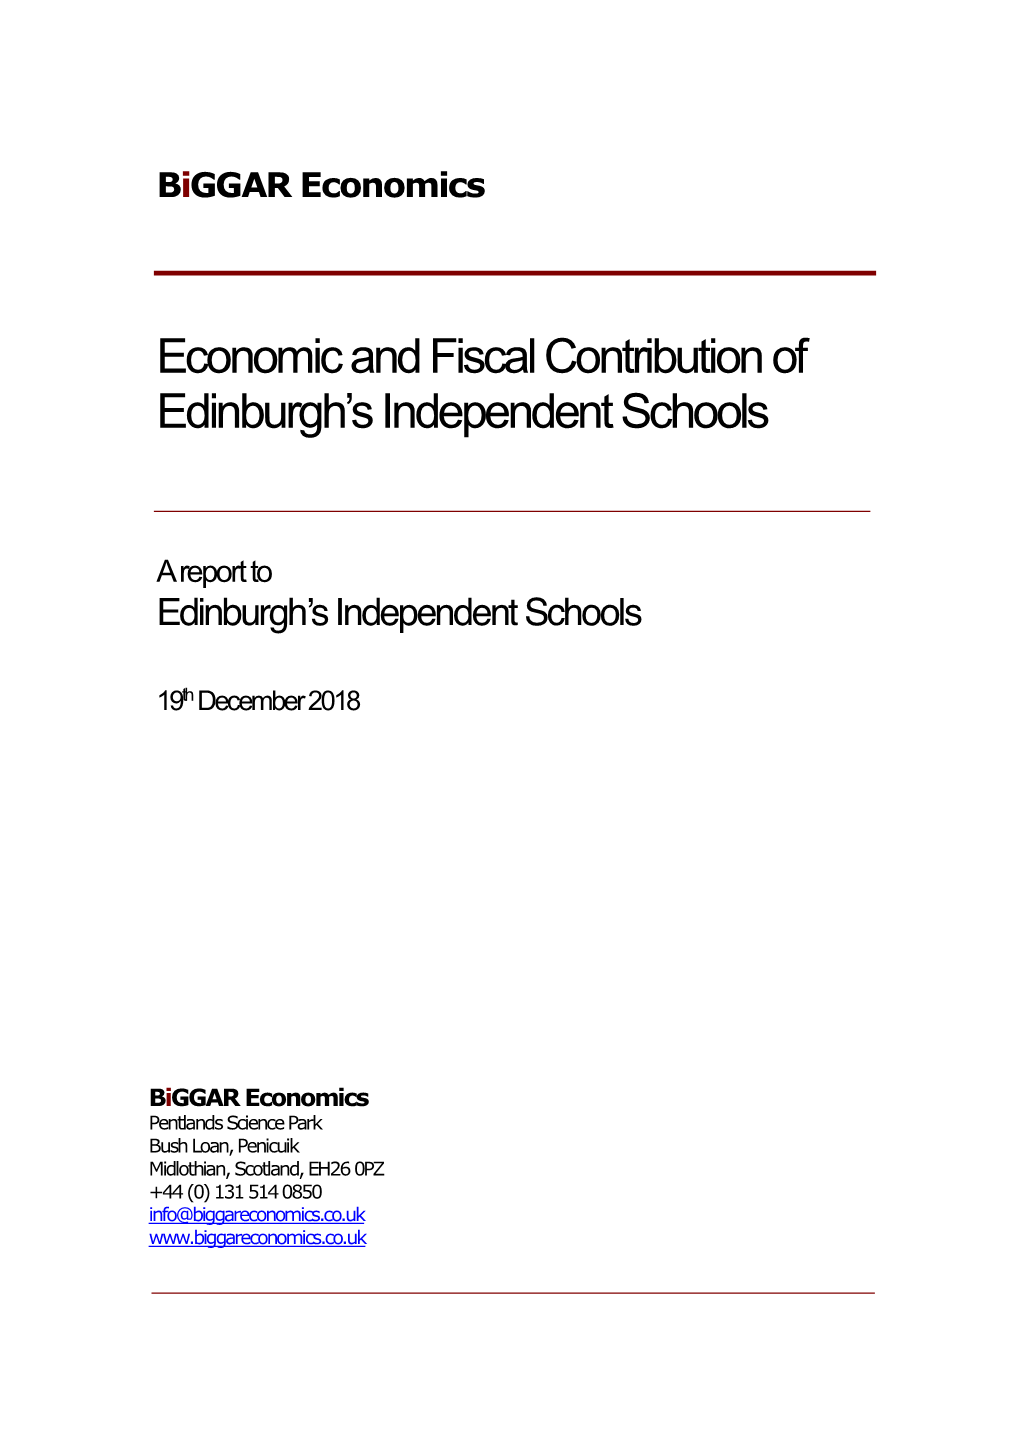 Economic and Fiscal Contribution of Edinburgh's Independent Schools